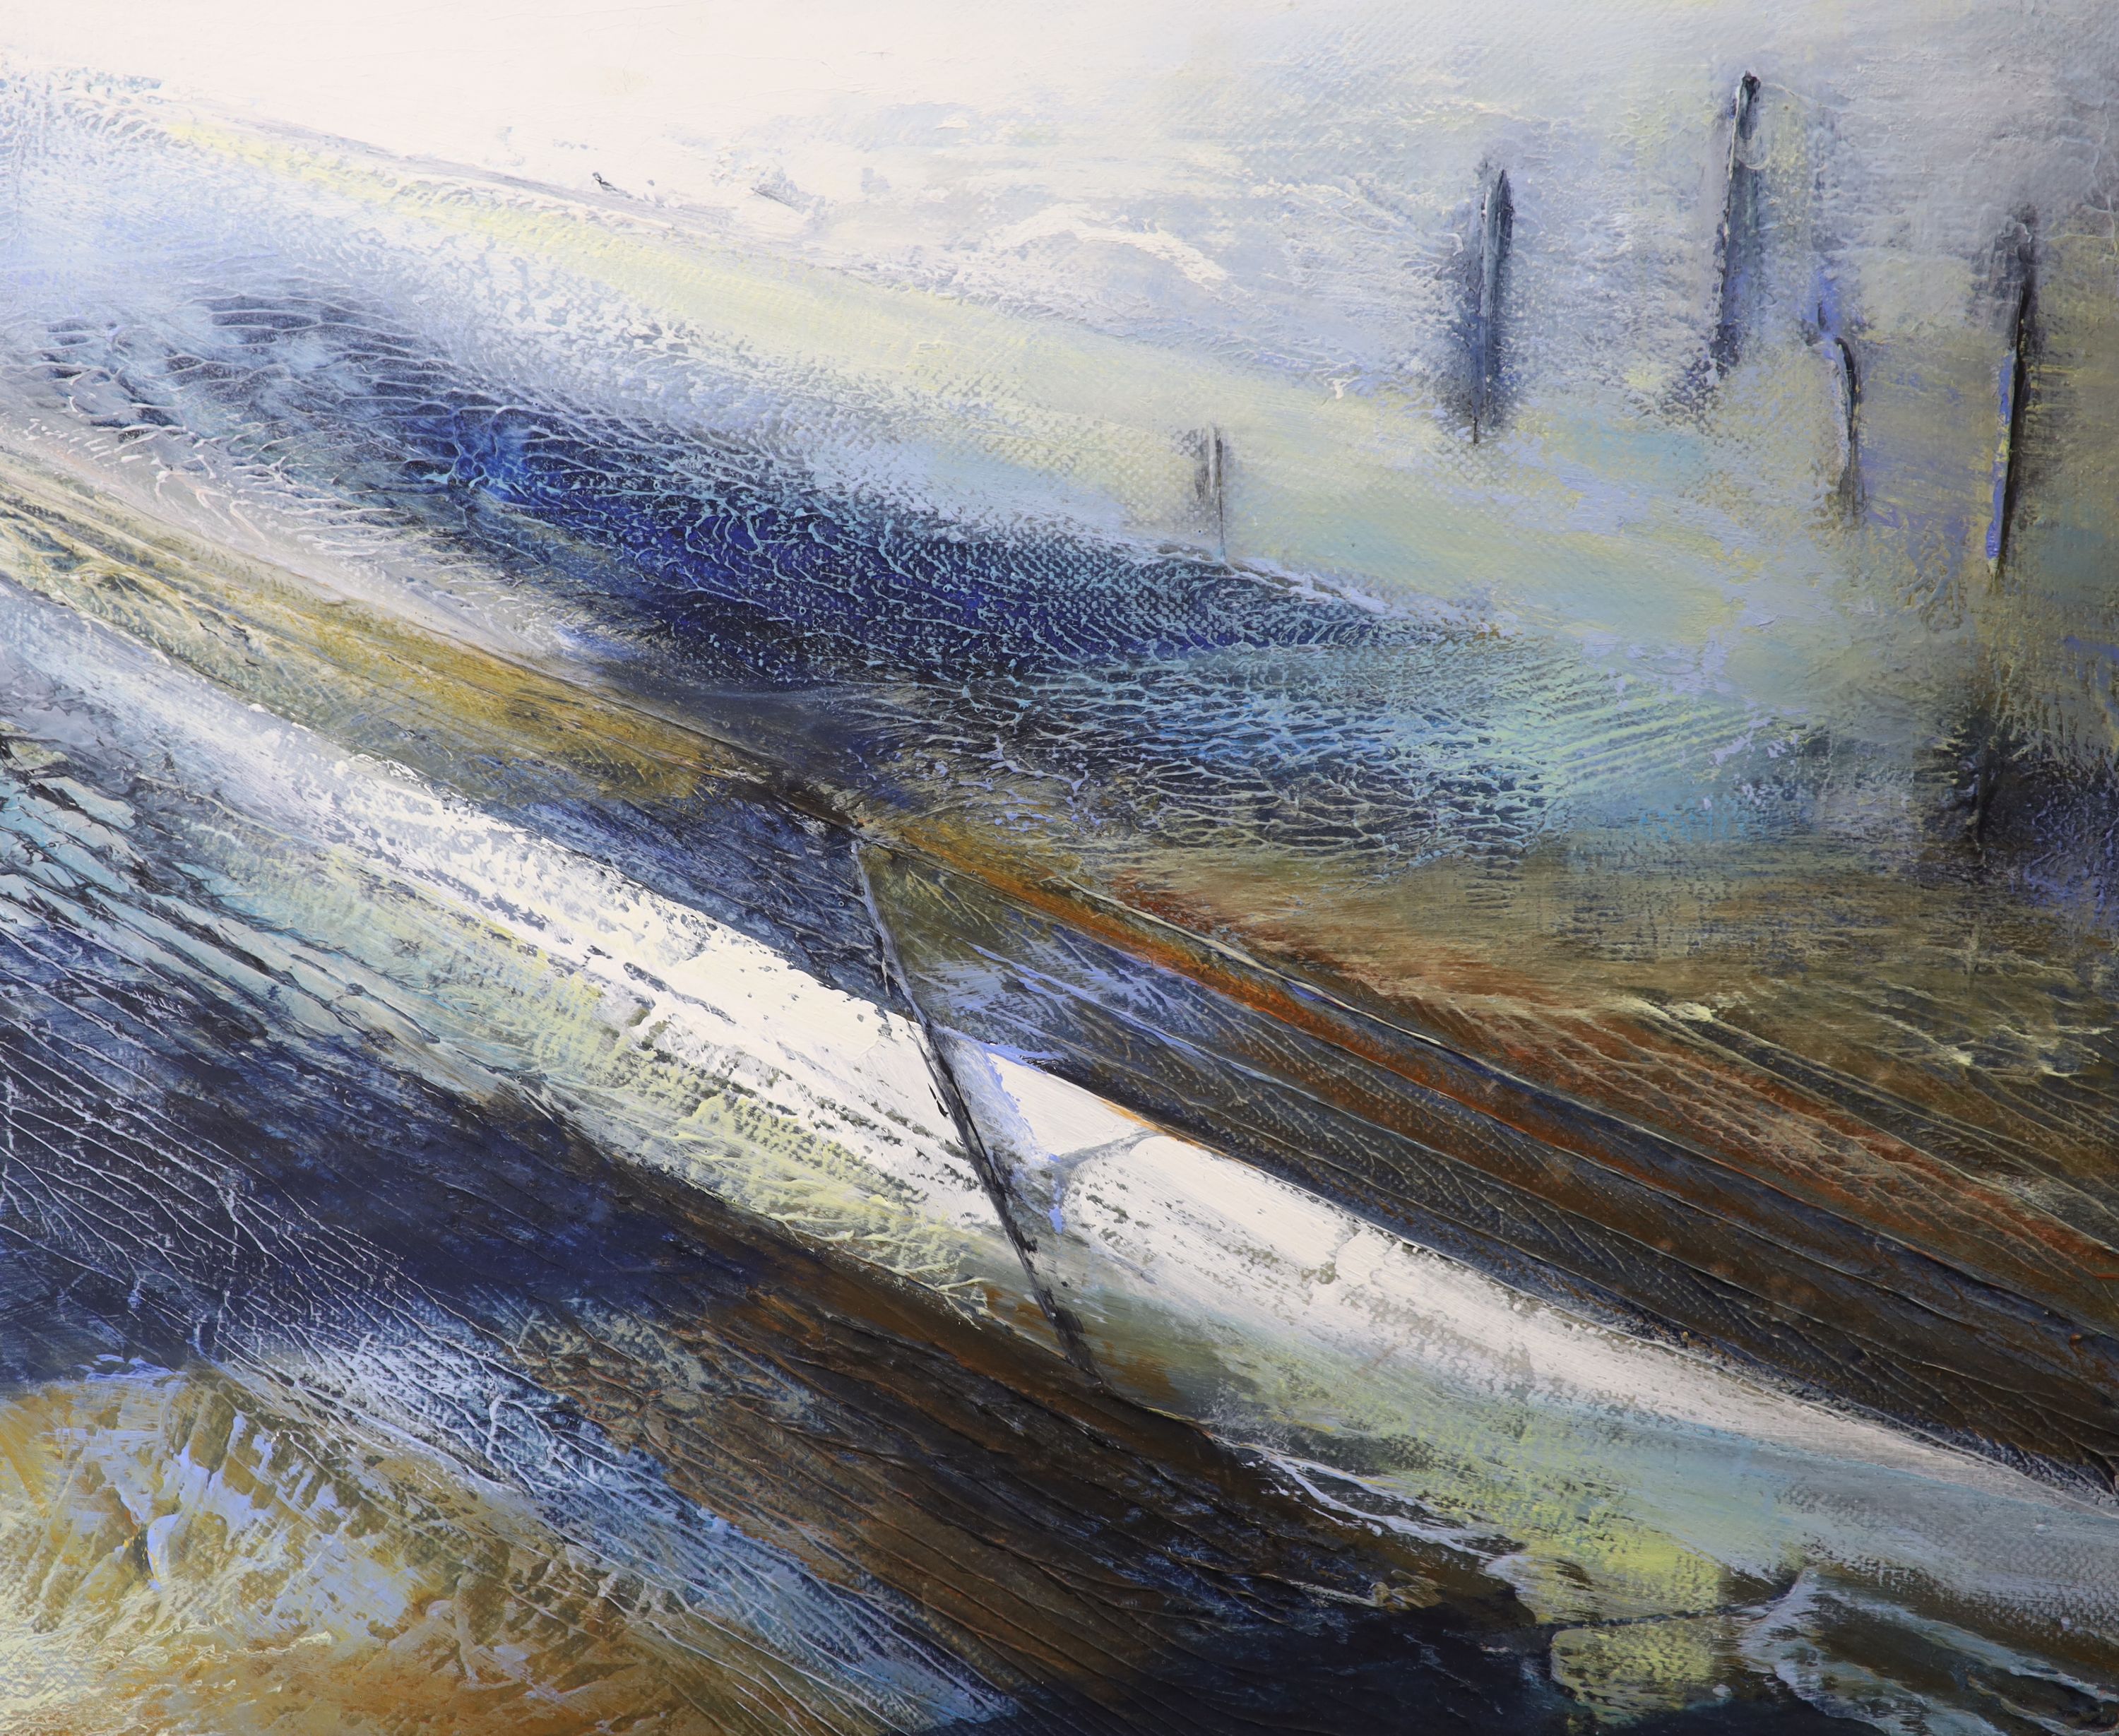 Catherine Barnes, oil on canvas, 'On Moving Waters', signed verso, 26 x 30cm, unframed